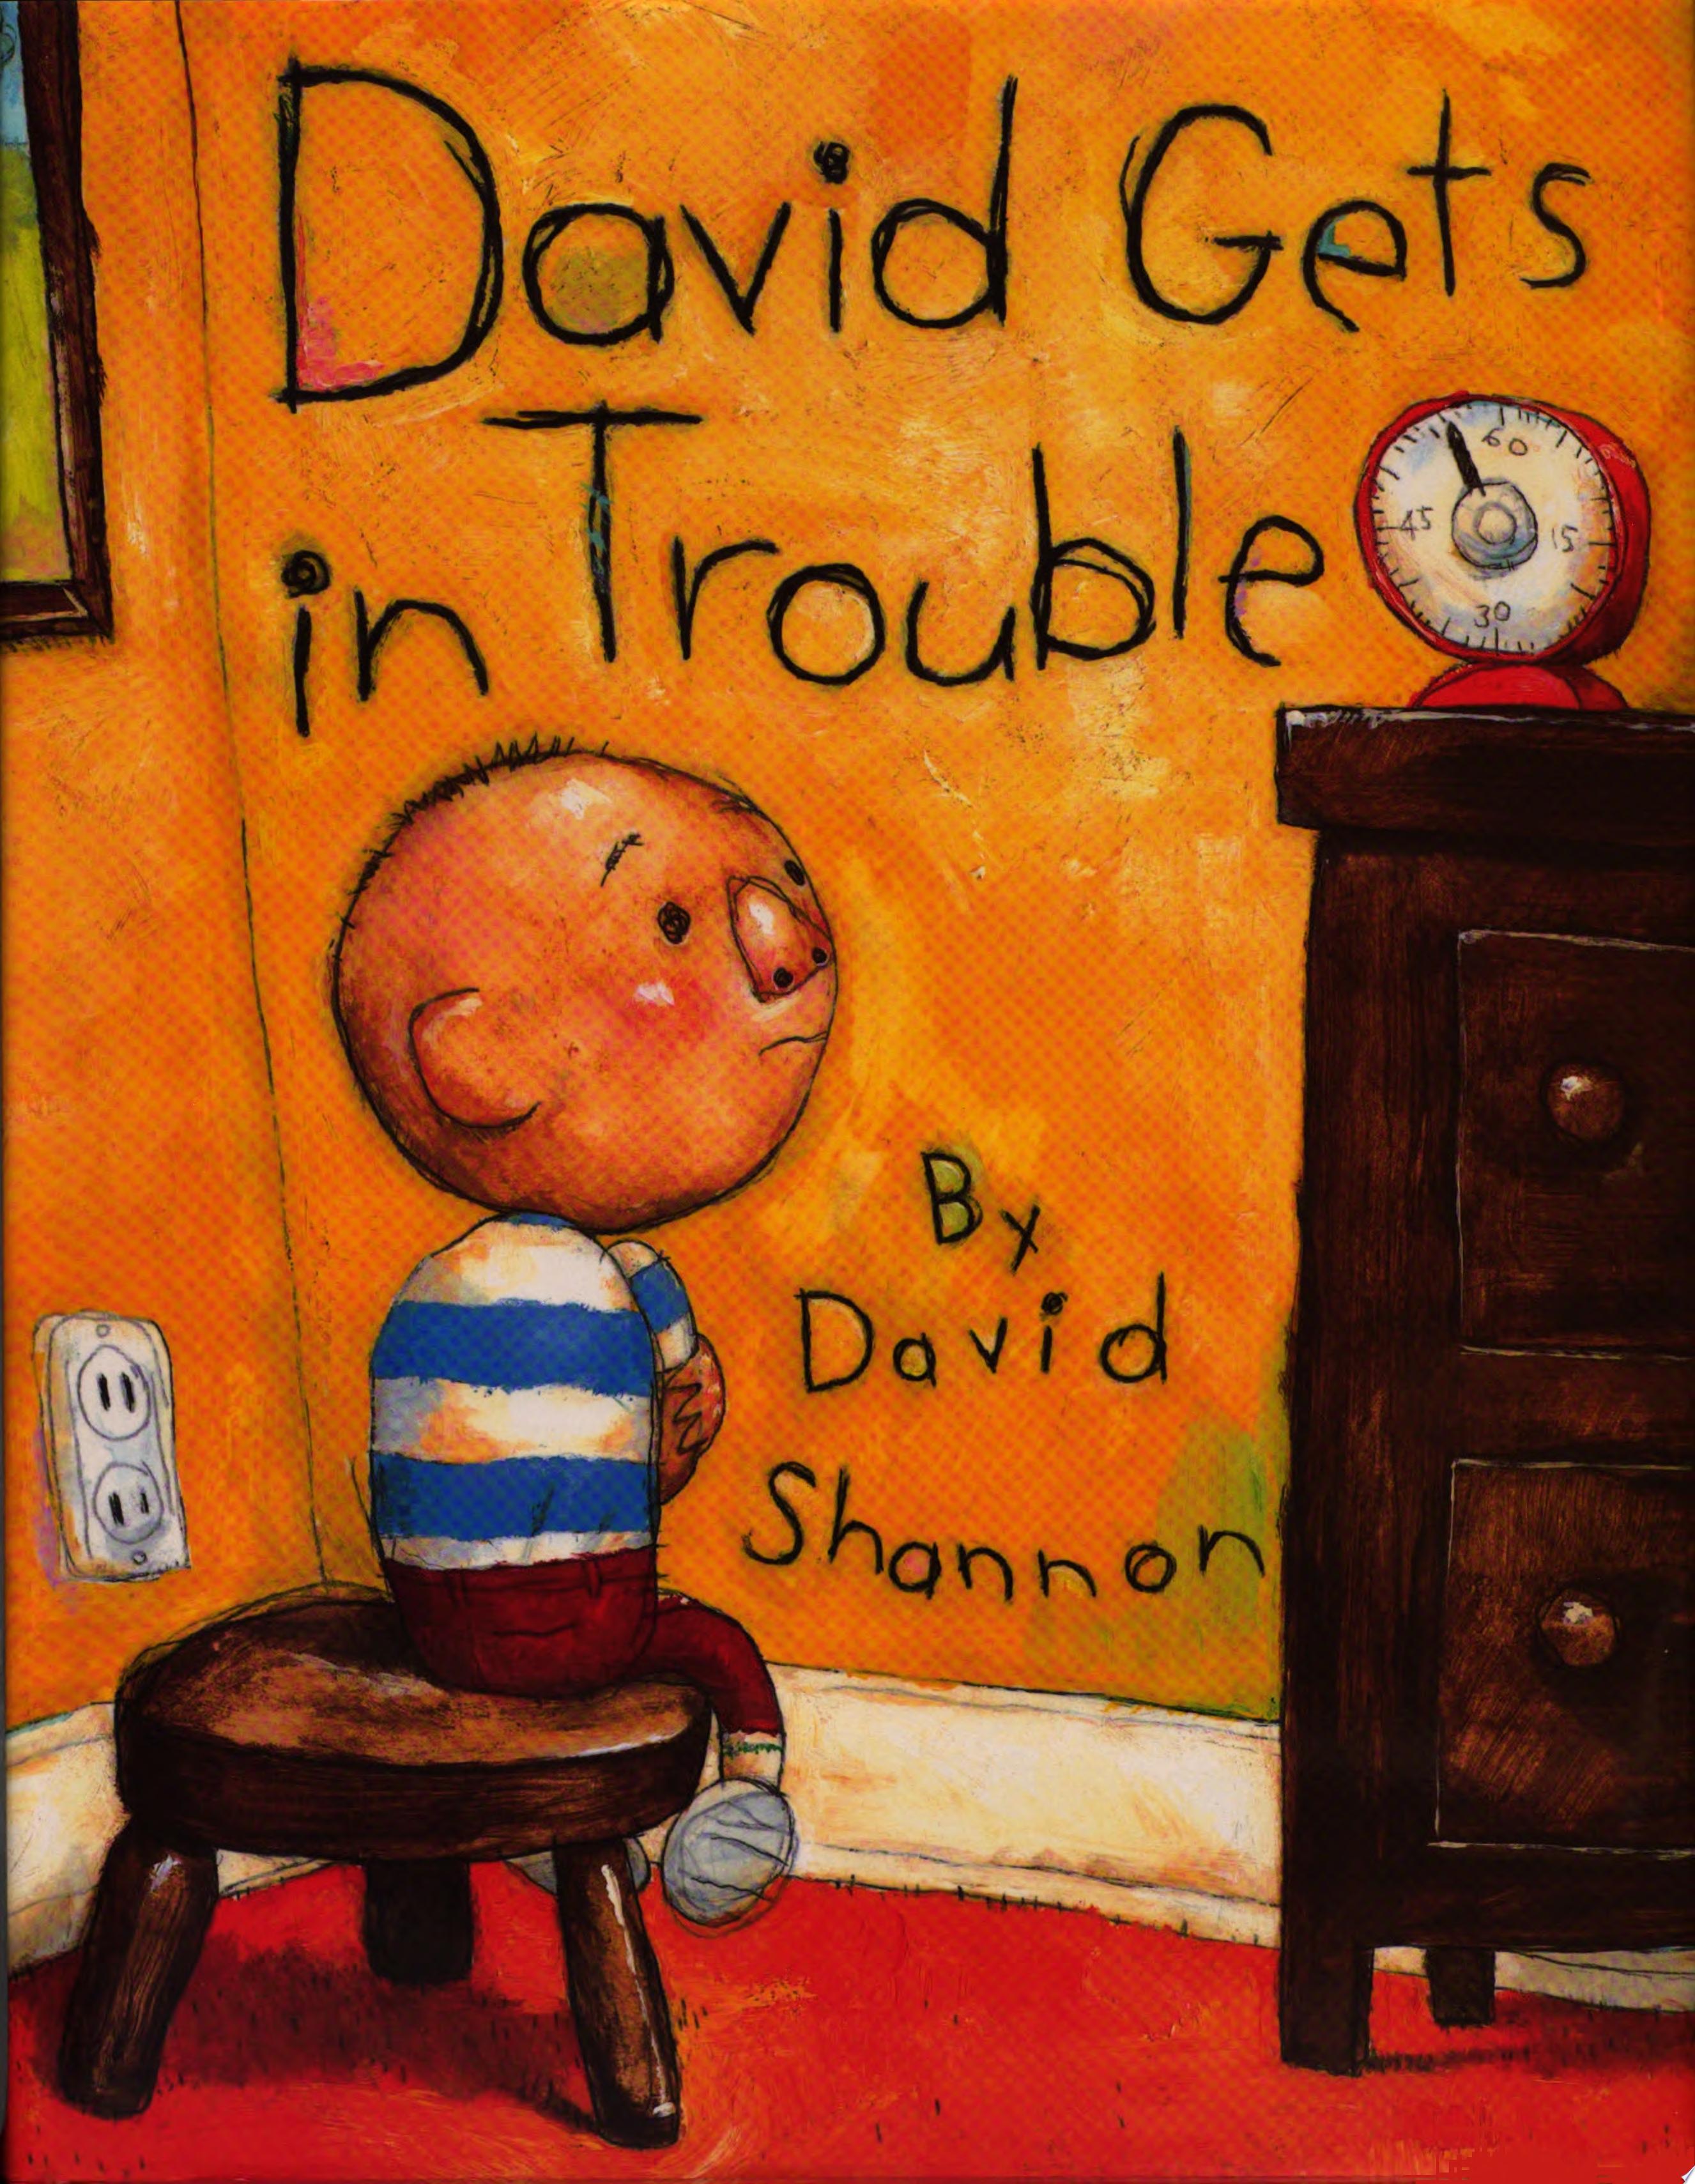 Image for "David Gets in Trouble"